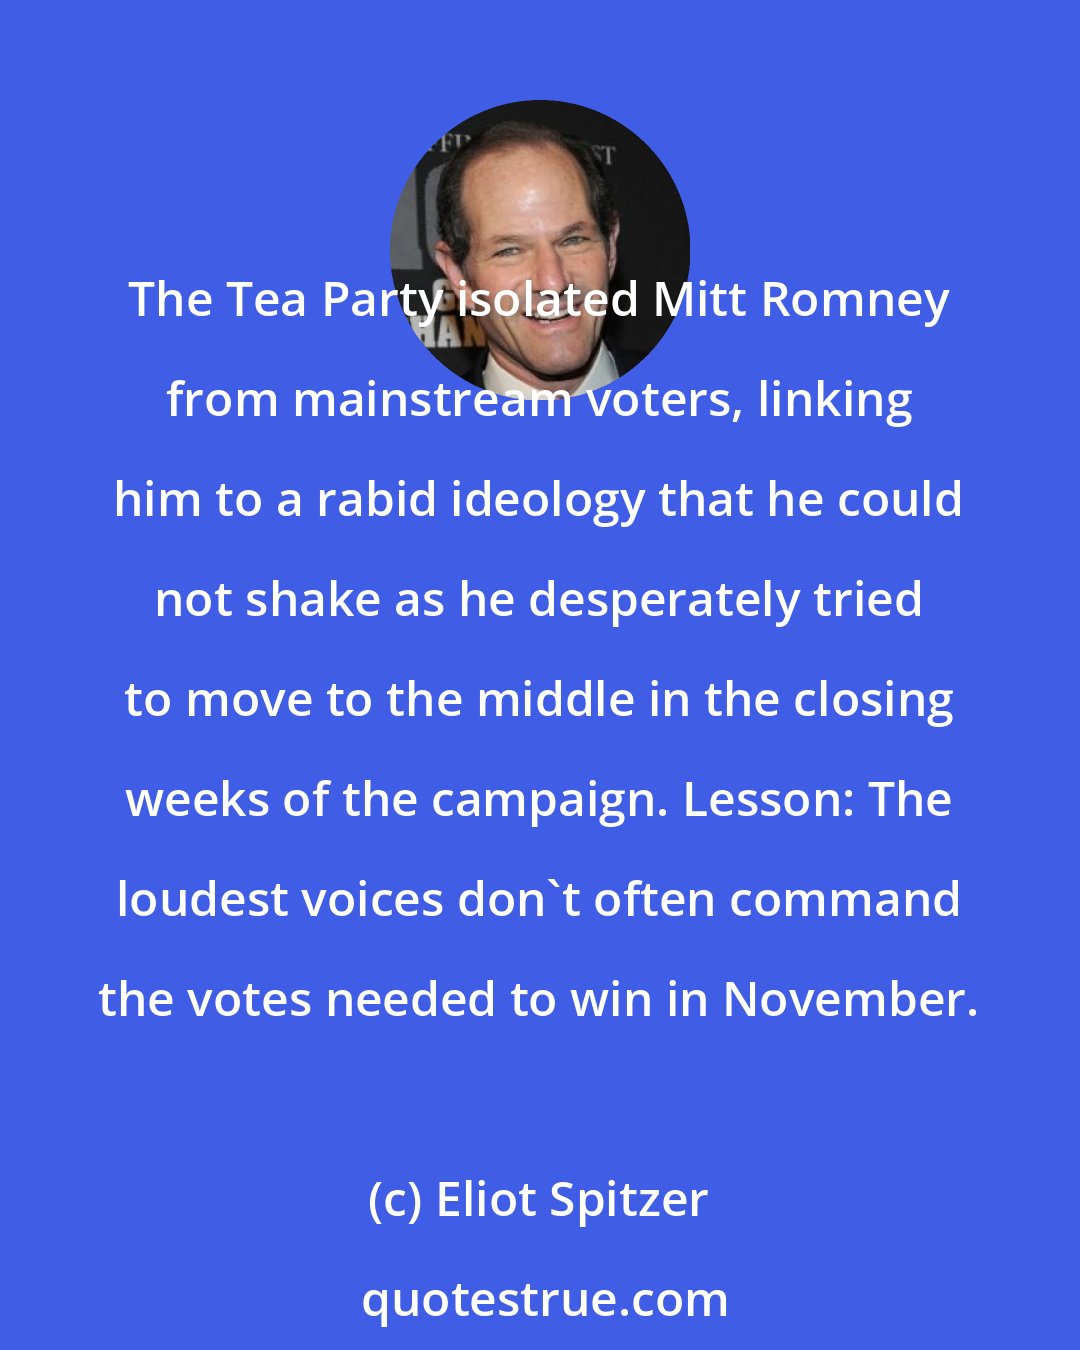 Eliot Spitzer: The Tea Party isolated Mitt Romney from mainstream voters, linking him to a rabid ideology that he could not shake as he desperately tried to move to the middle in the closing weeks of the campaign. Lesson: The loudest voices don't often command the votes needed to win in November.